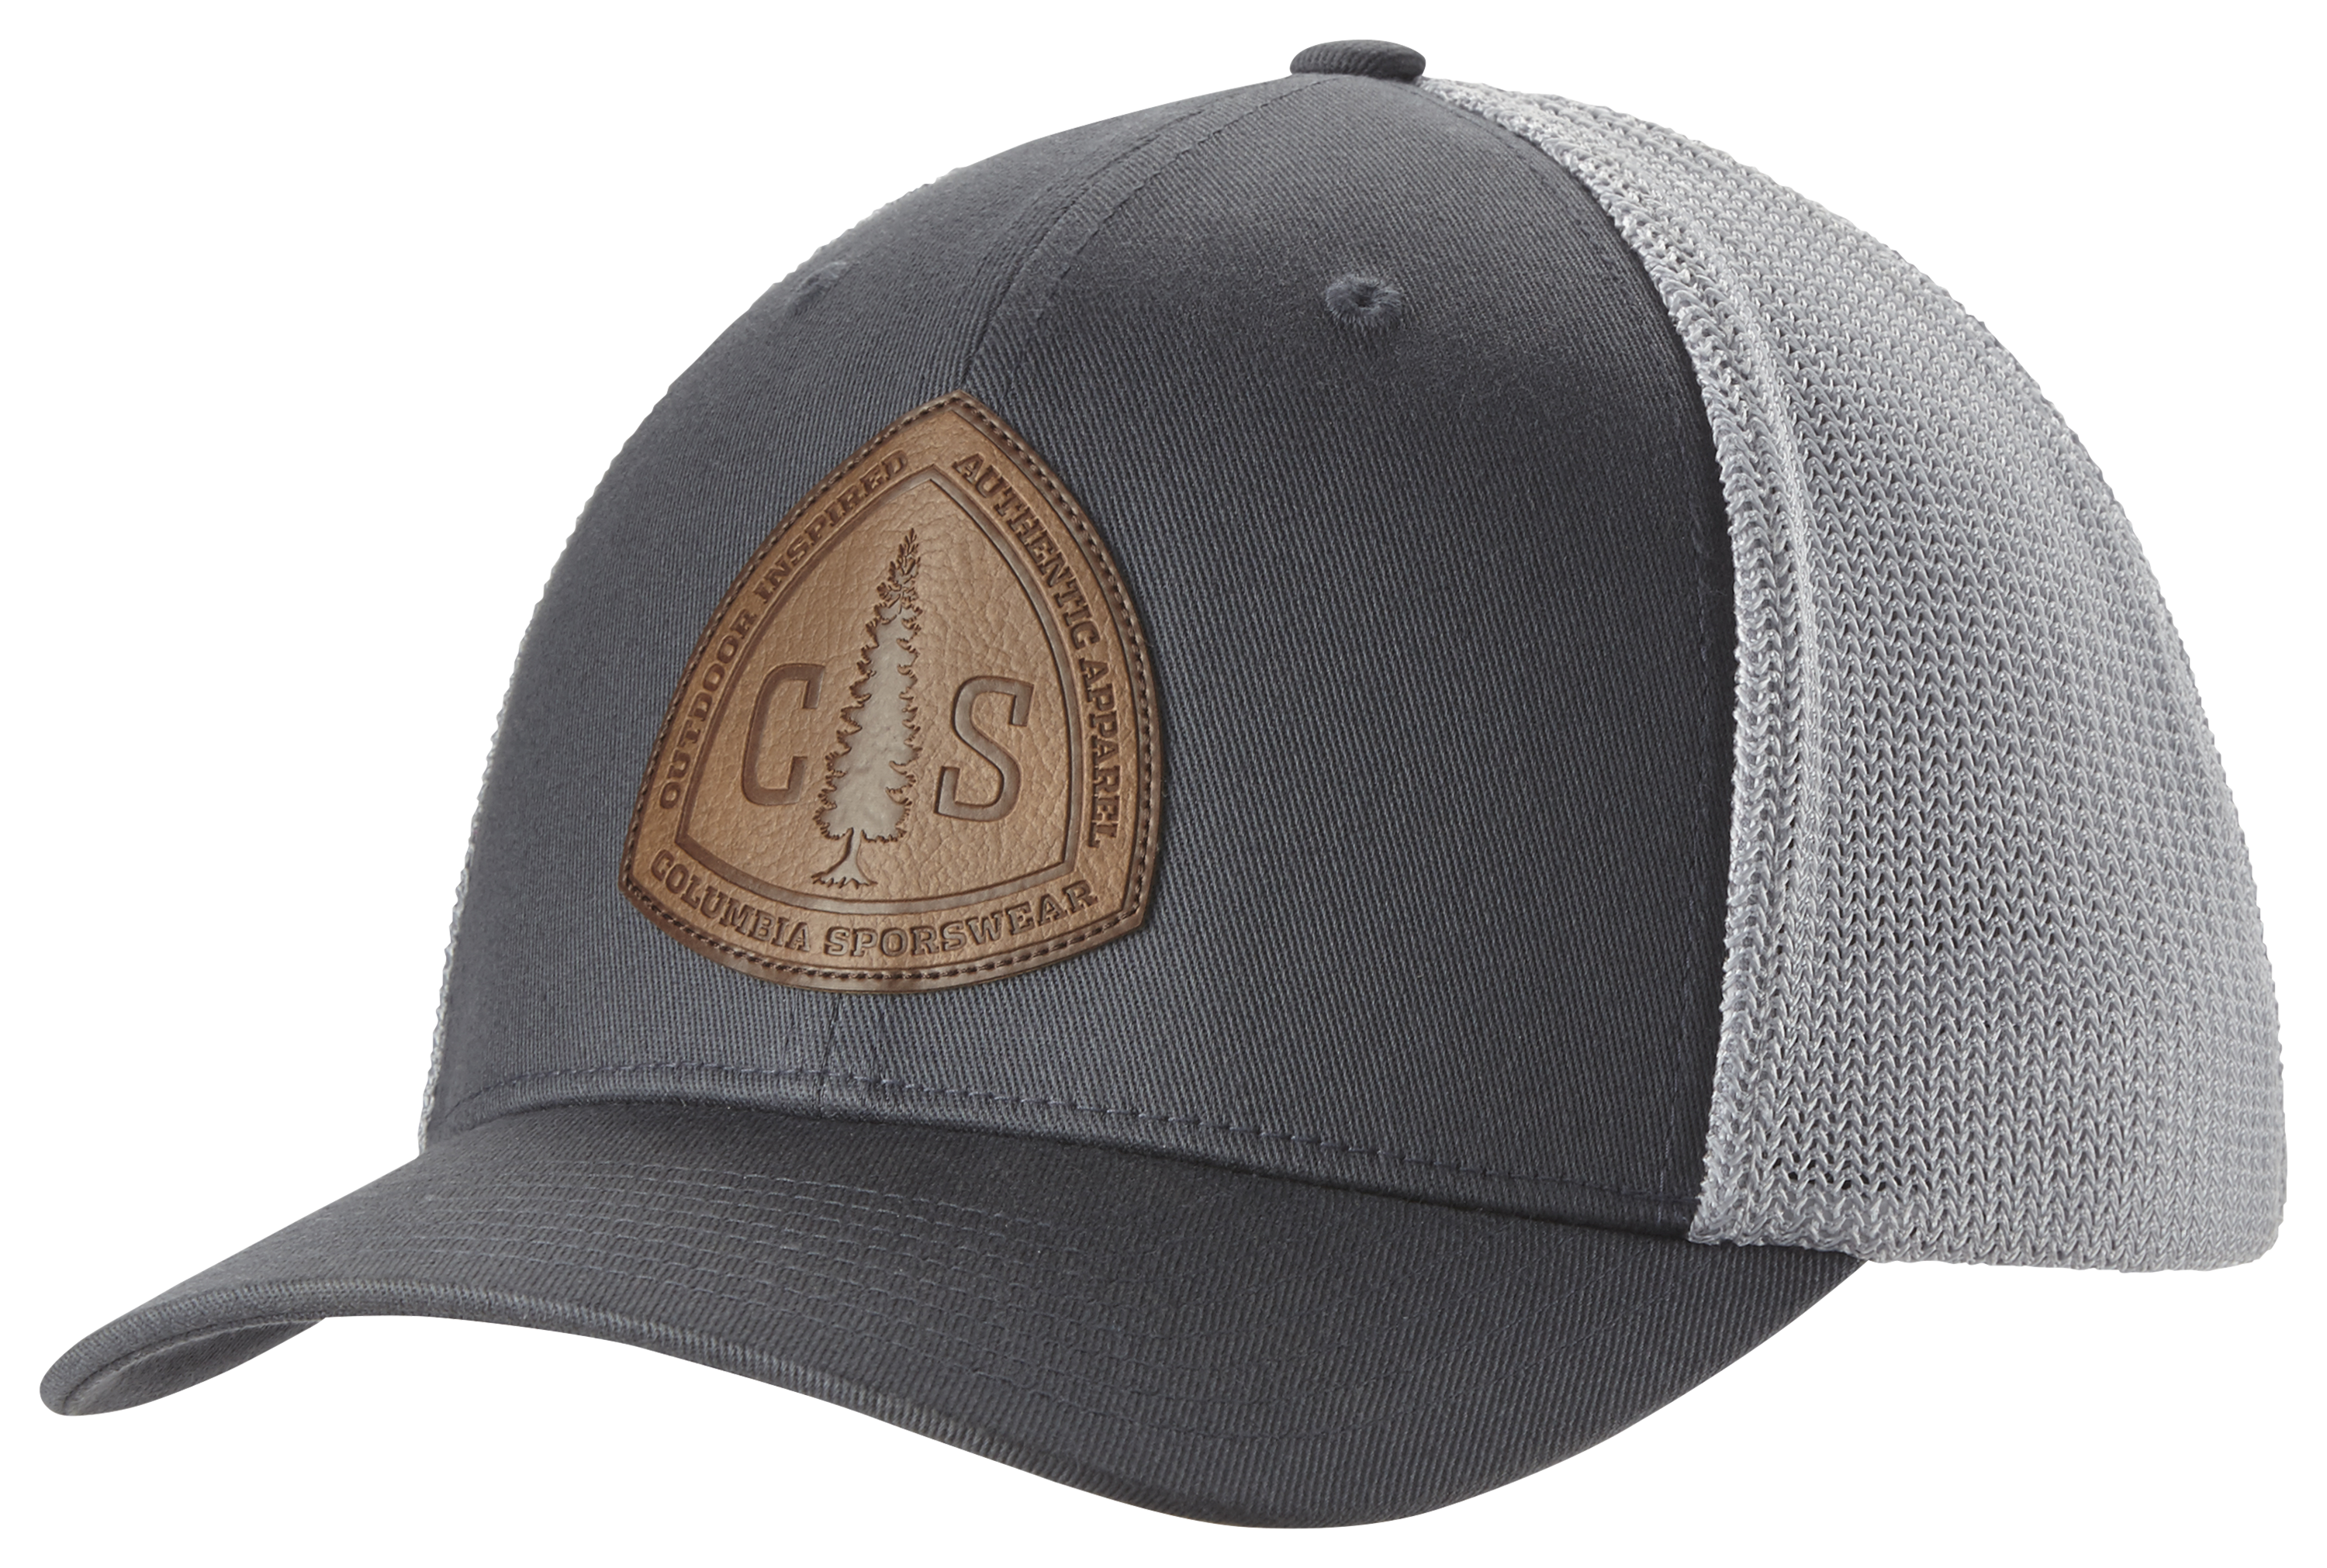 Columbia Rugged Outdoor Mesh Hat 